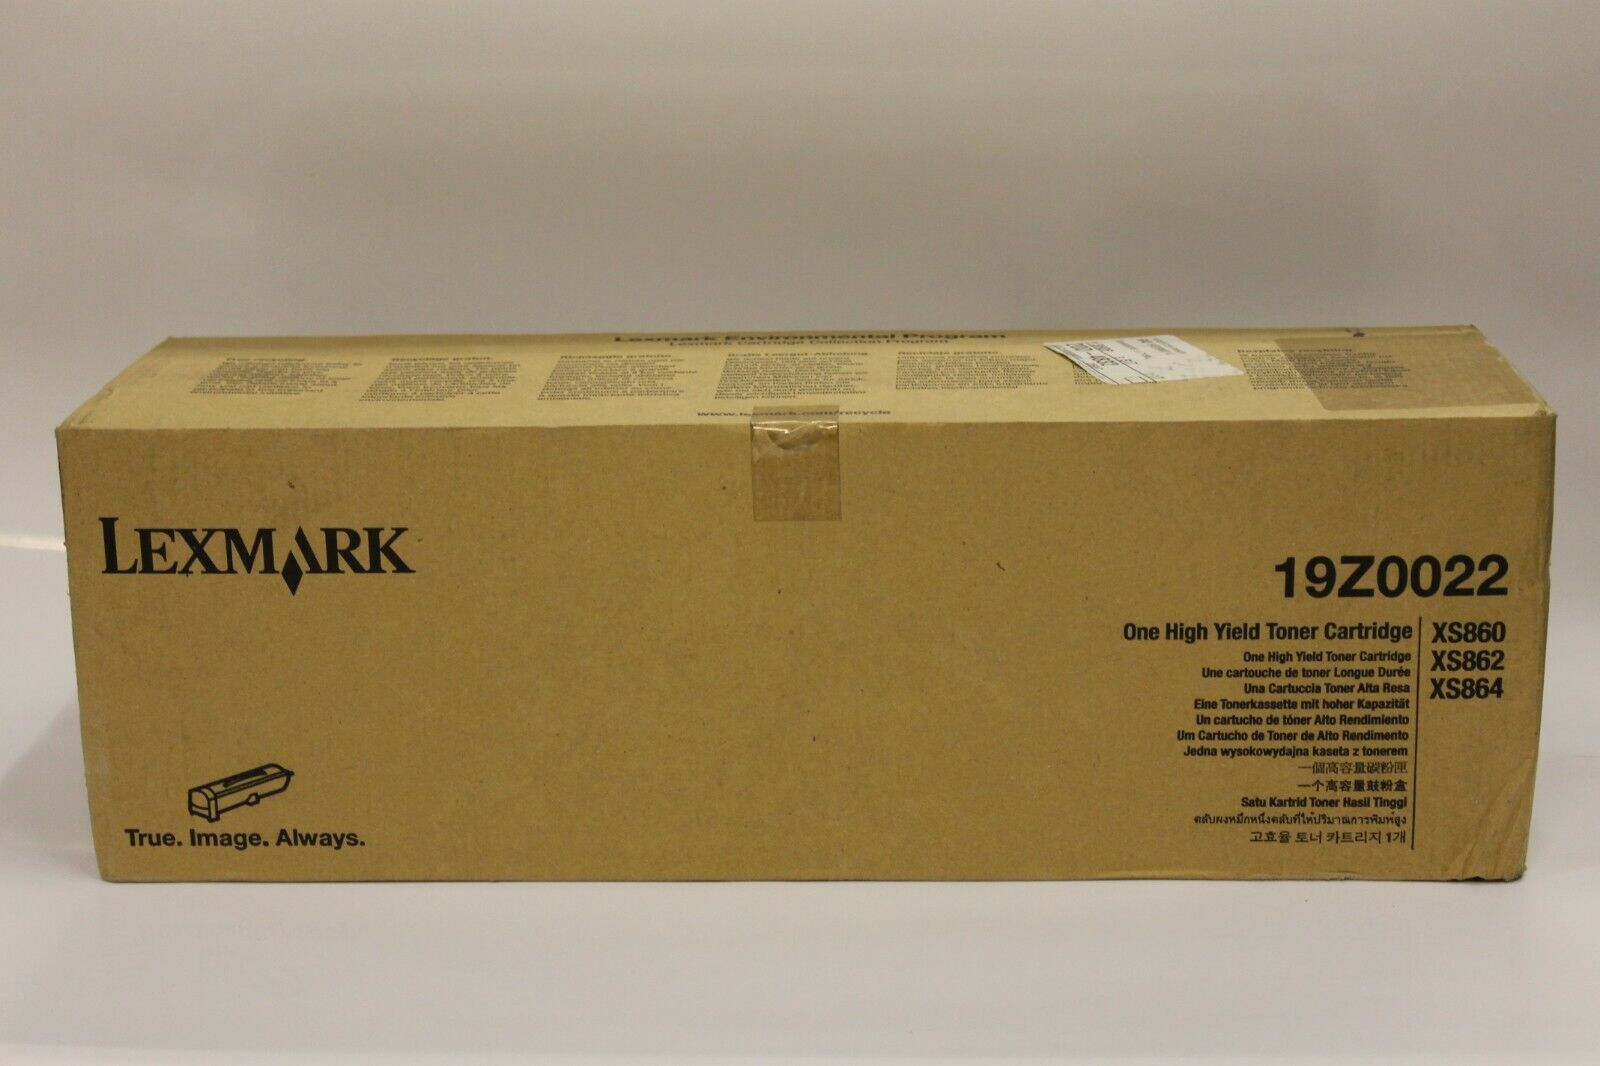 Lexmark 19Z0022, High Yield Toner Cartridge, New and Unopened